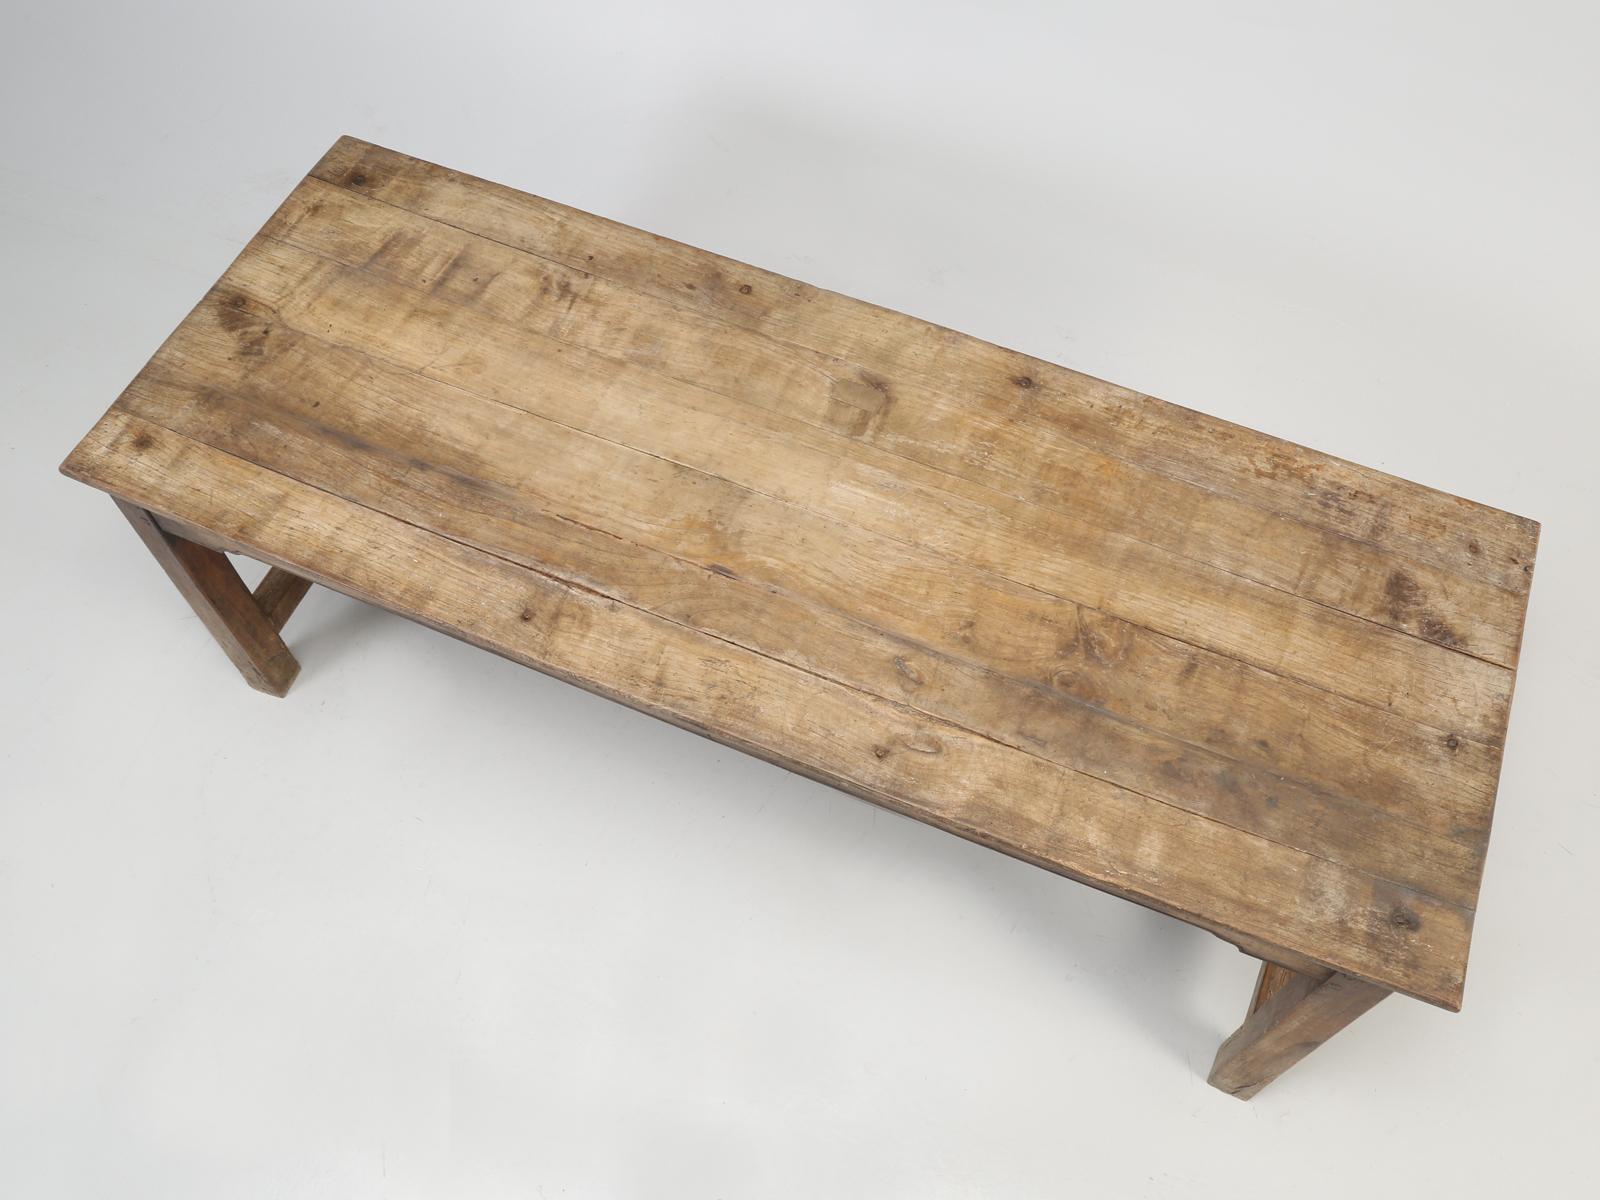 Antique French rustic cherrywood farm table. Years ago, going to France to find Country French cherrywood farm tables was all the rage for the American antique dealer trade, but it was so intense, that today, its like finding a needle in a haystack.